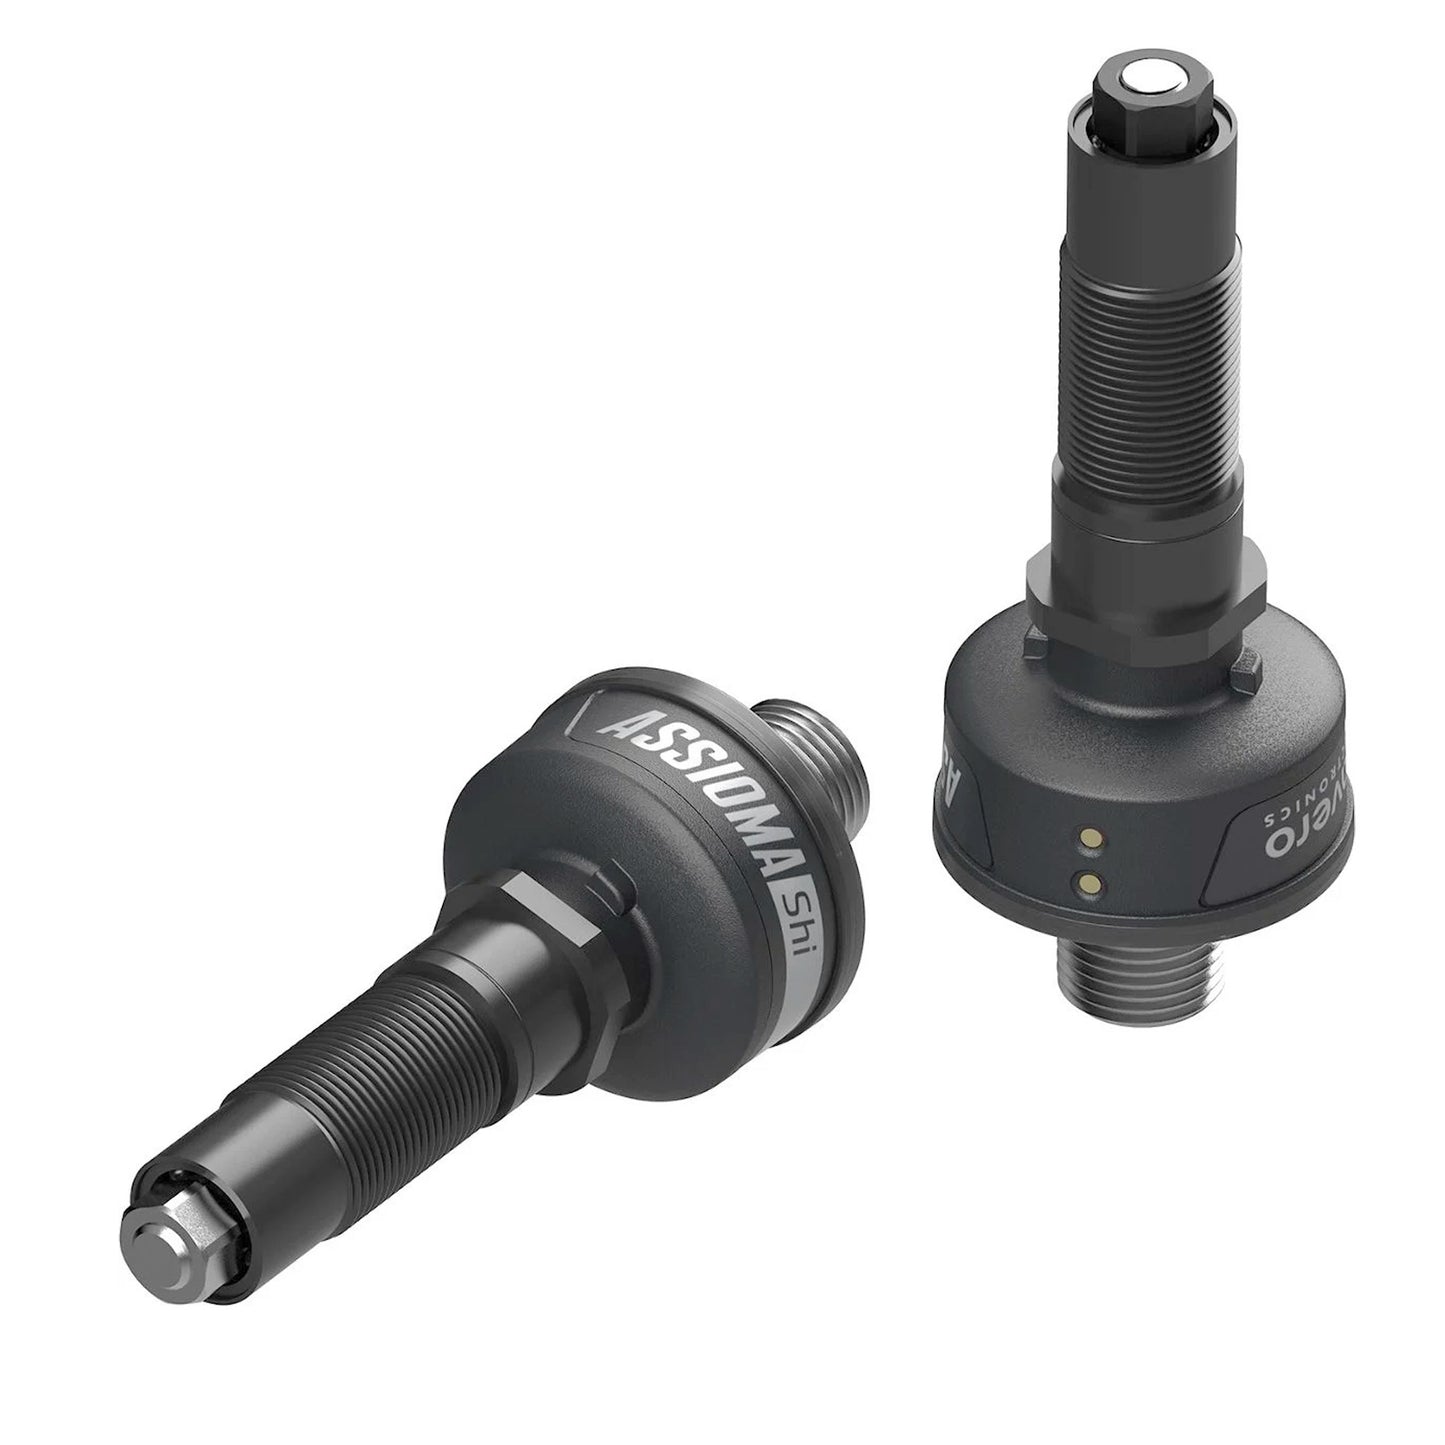 Favero Assioma DUO Double Side Power Meter Spindles for Shimano - ANT+ Power Cadence Torque